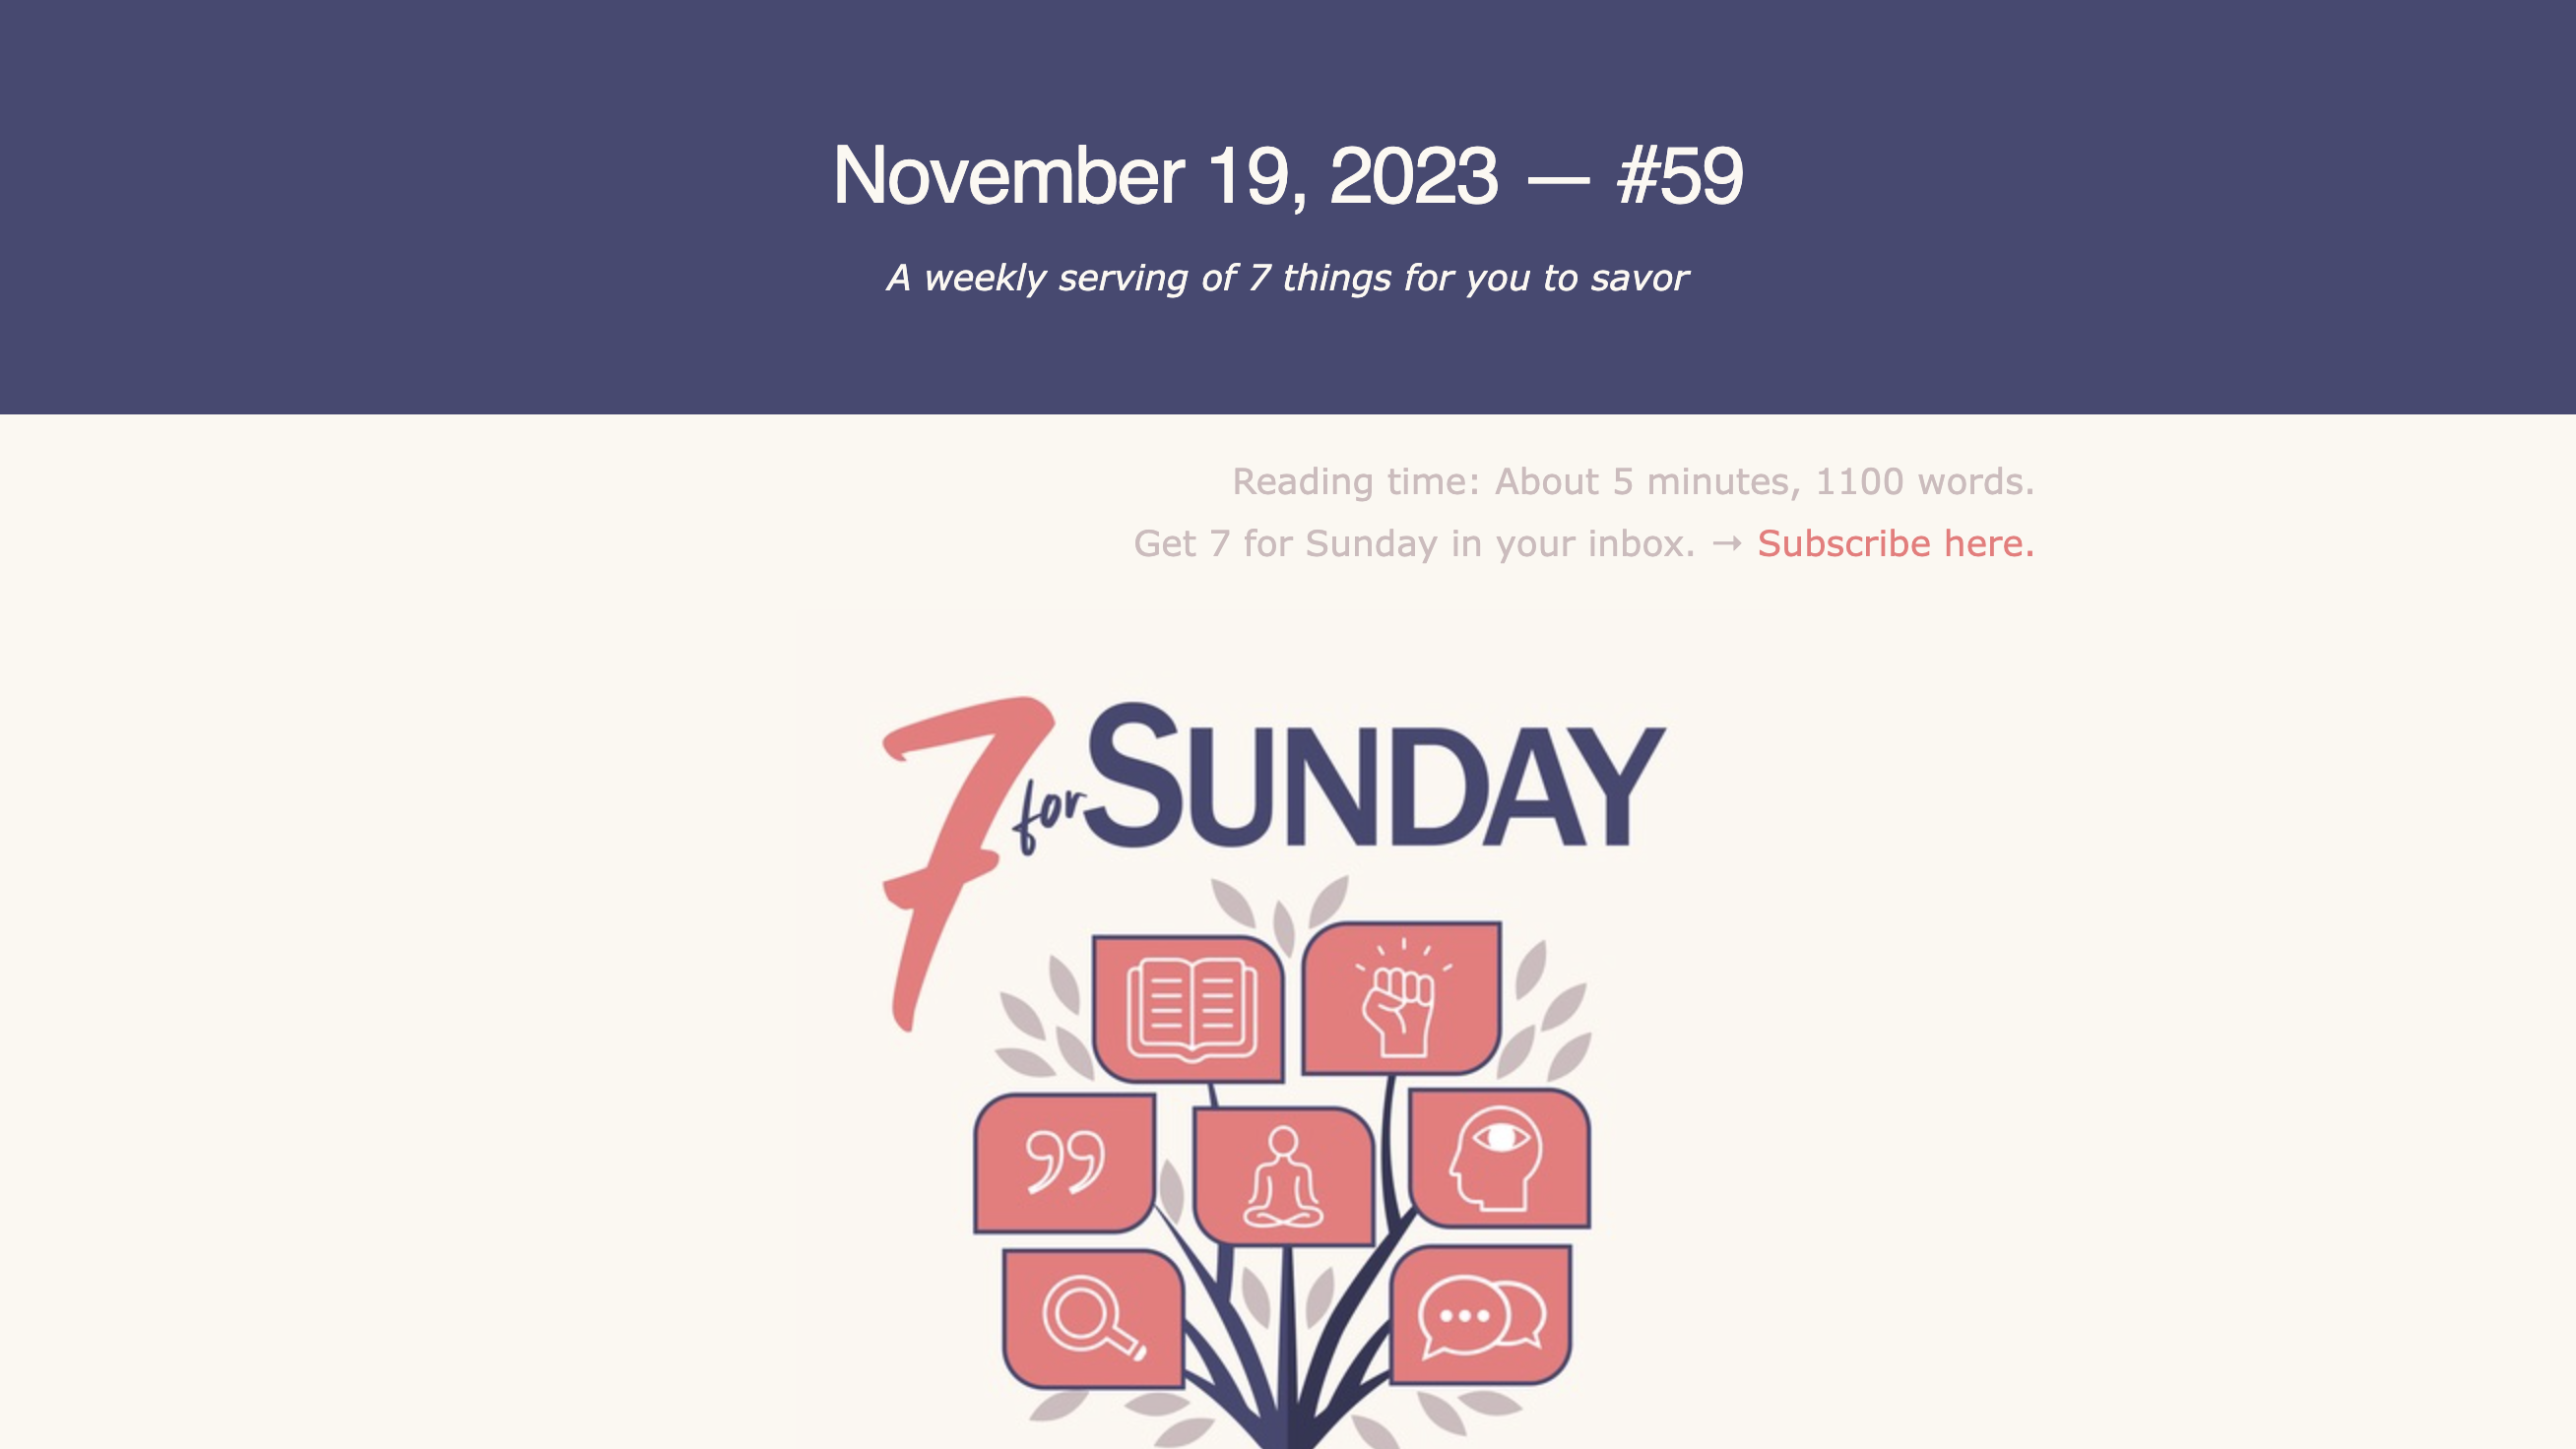 7 for Sunday homepage